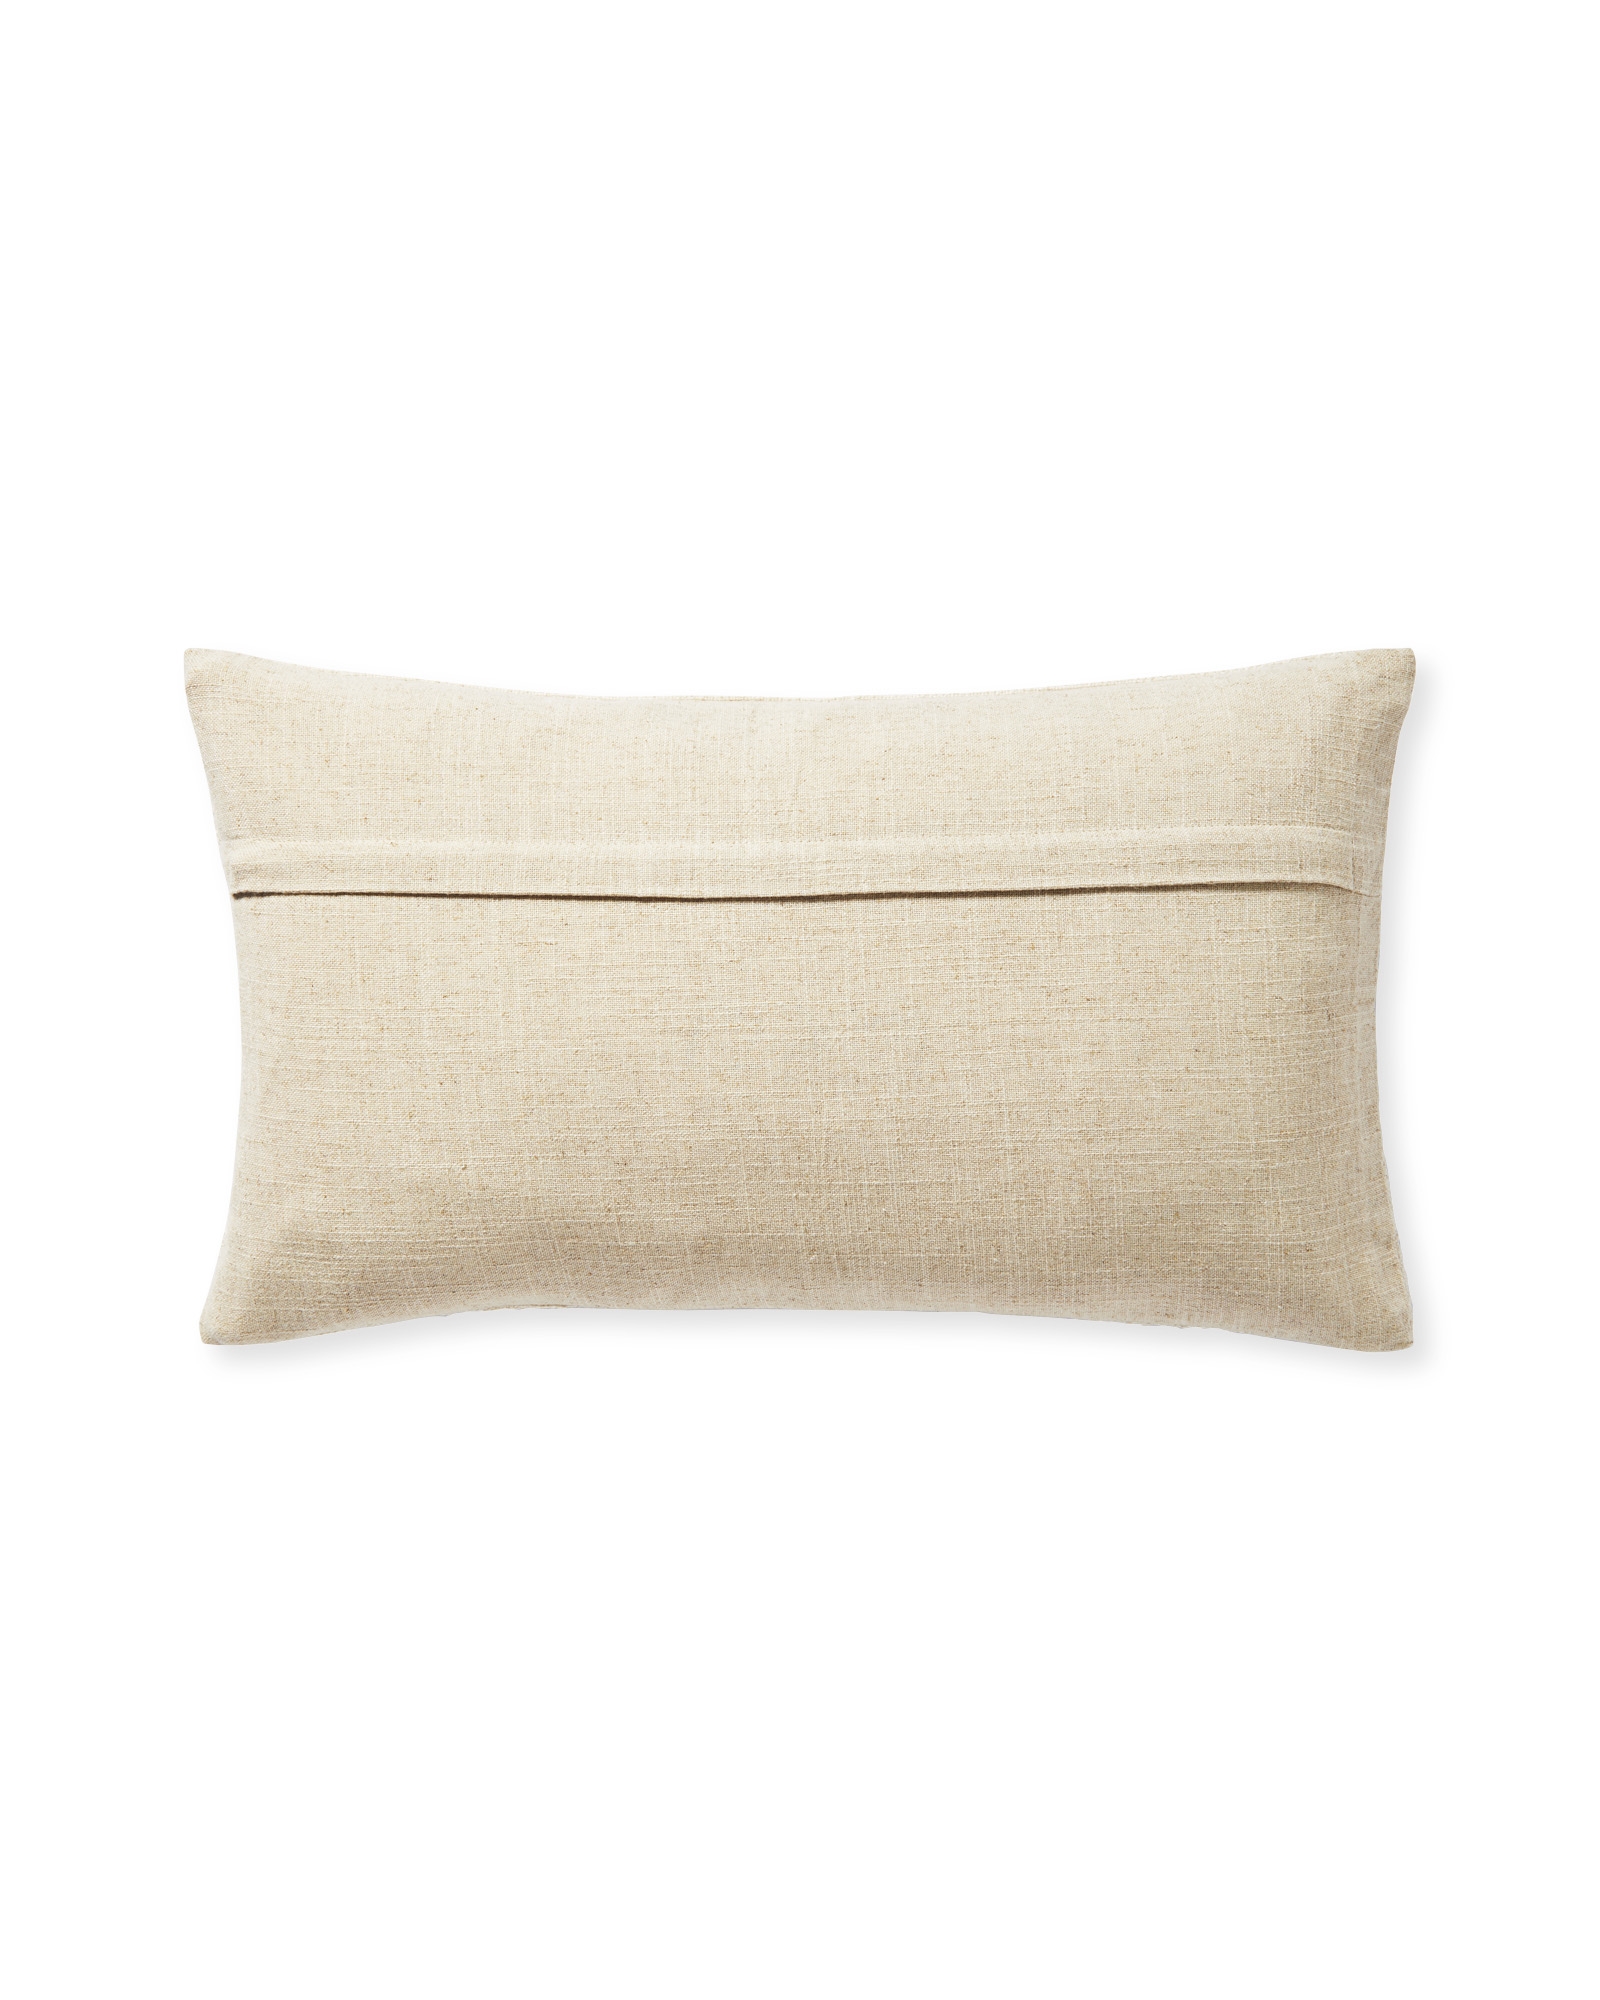 Pebble Cove Pillow Cover - Image 2